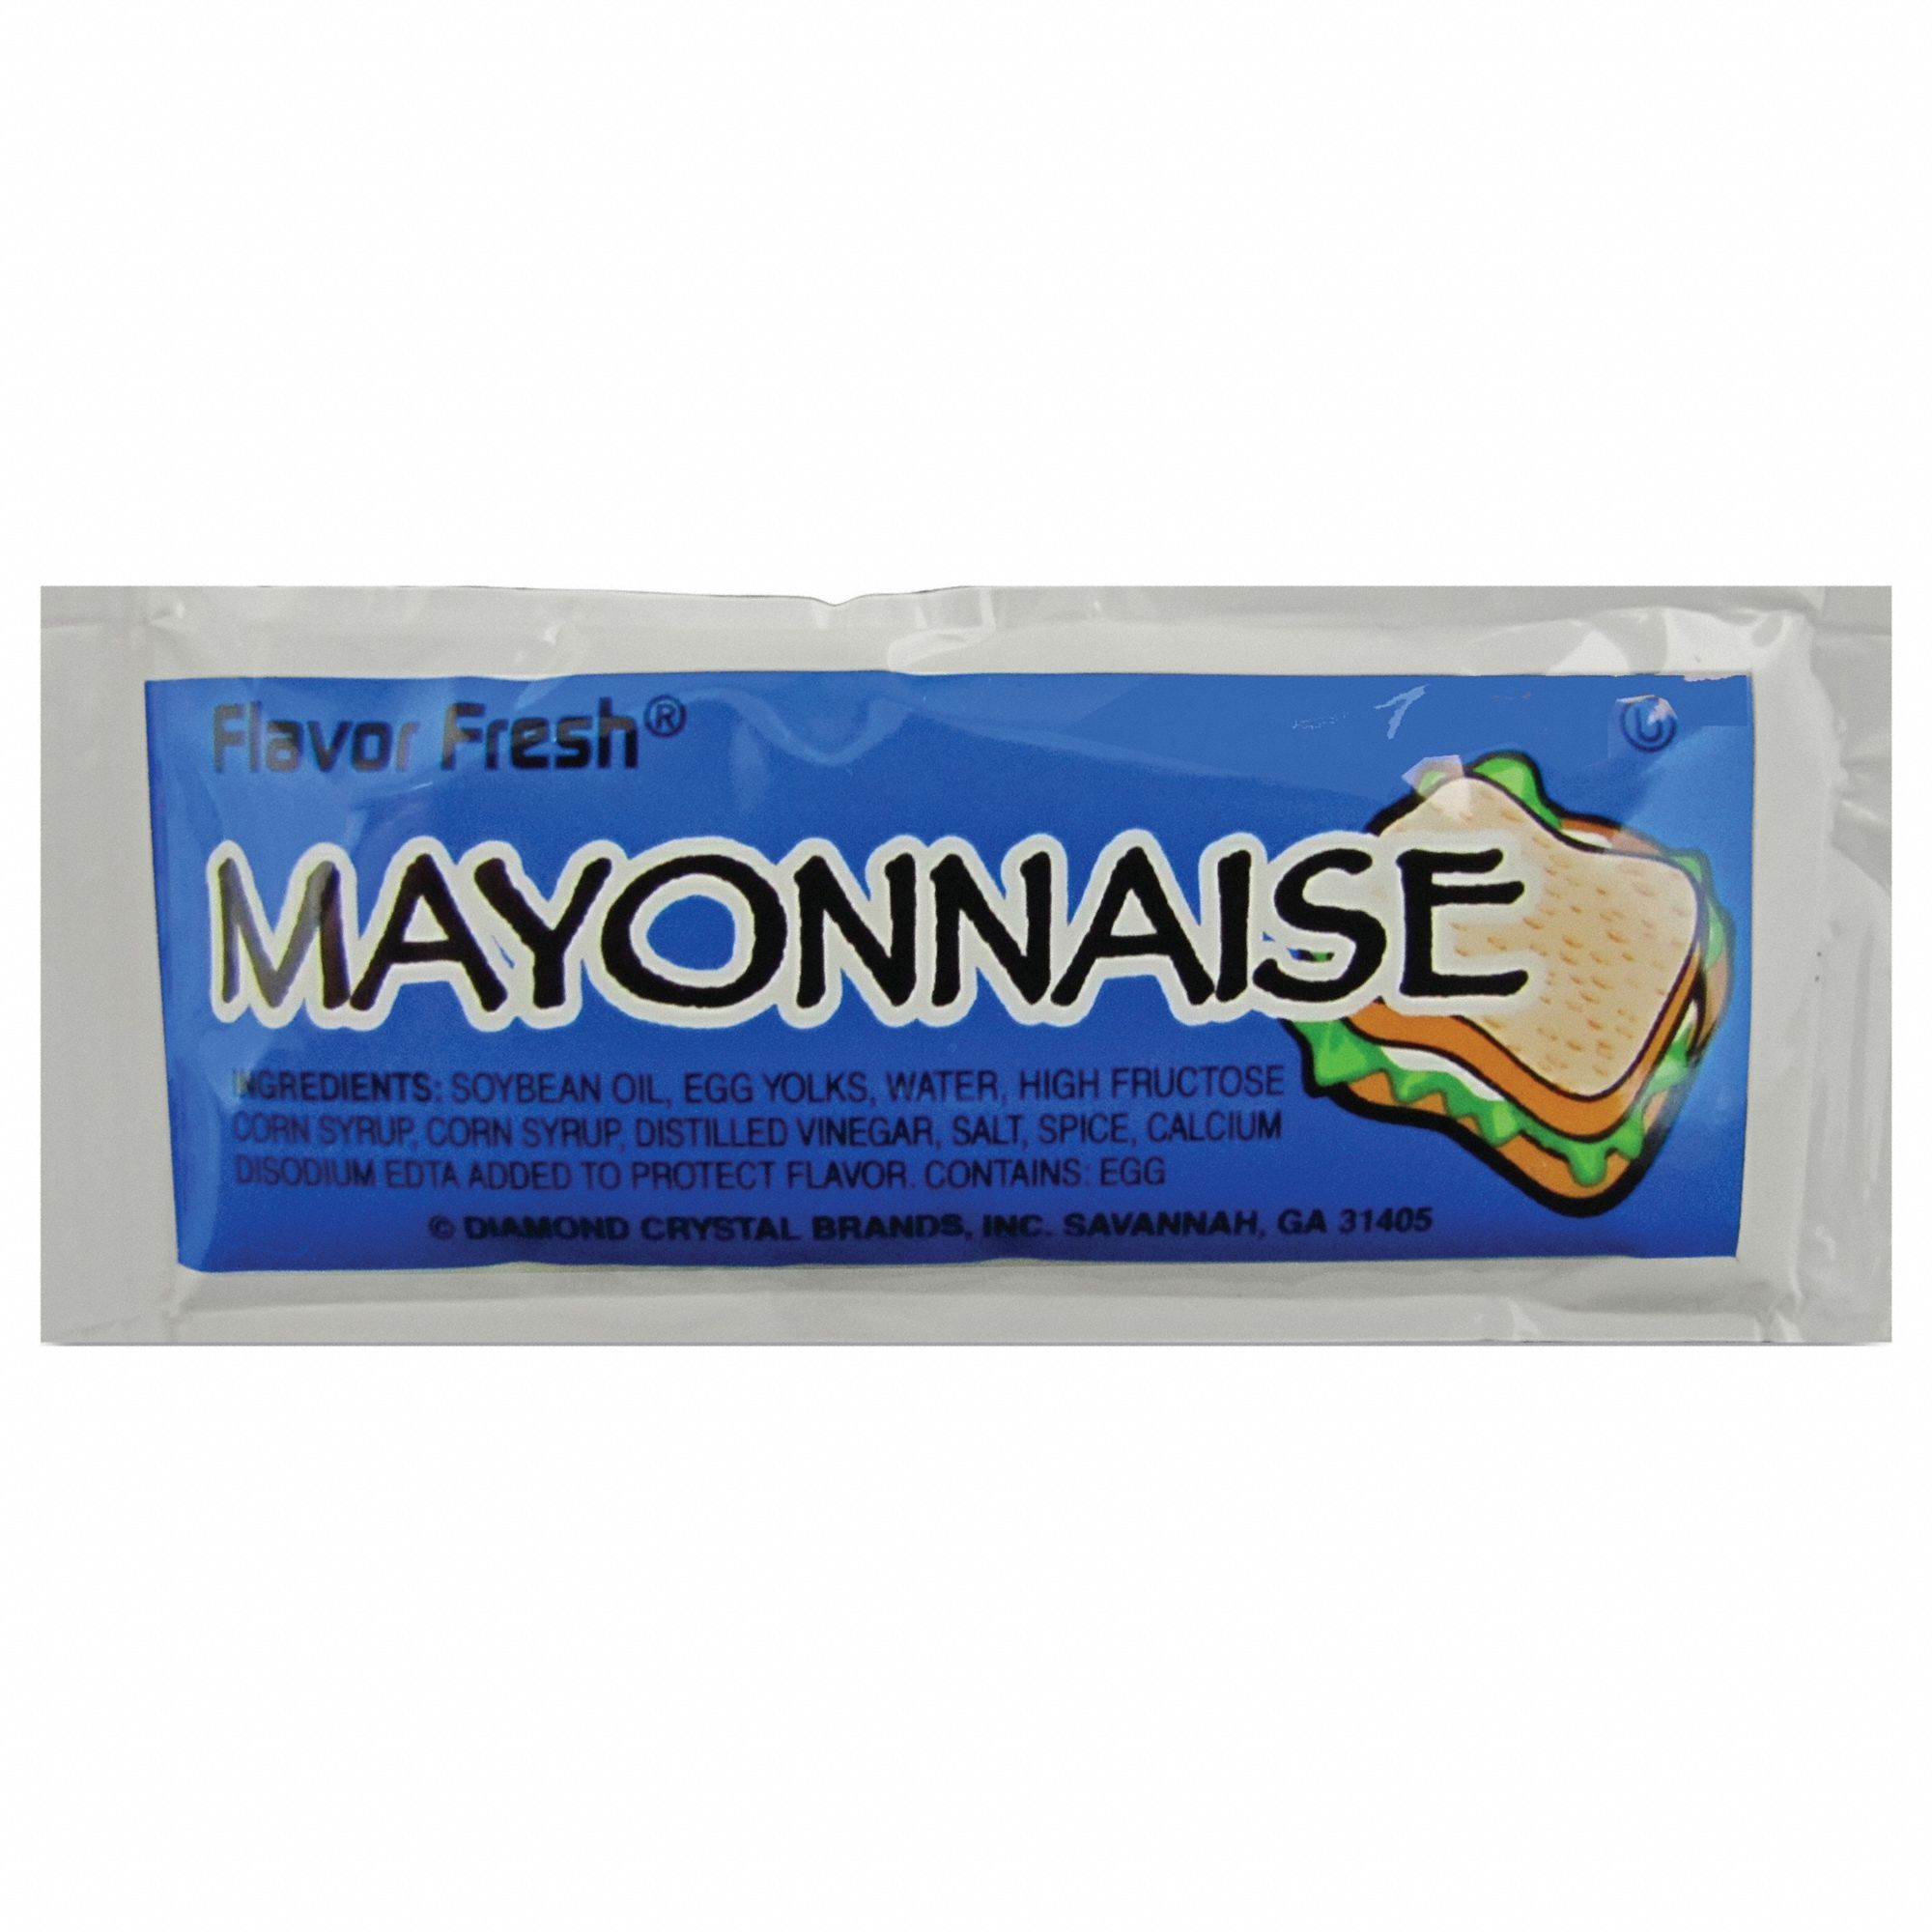 Mayonnaise: 0.32 oz Item Size, Packet, 200 Pack Count